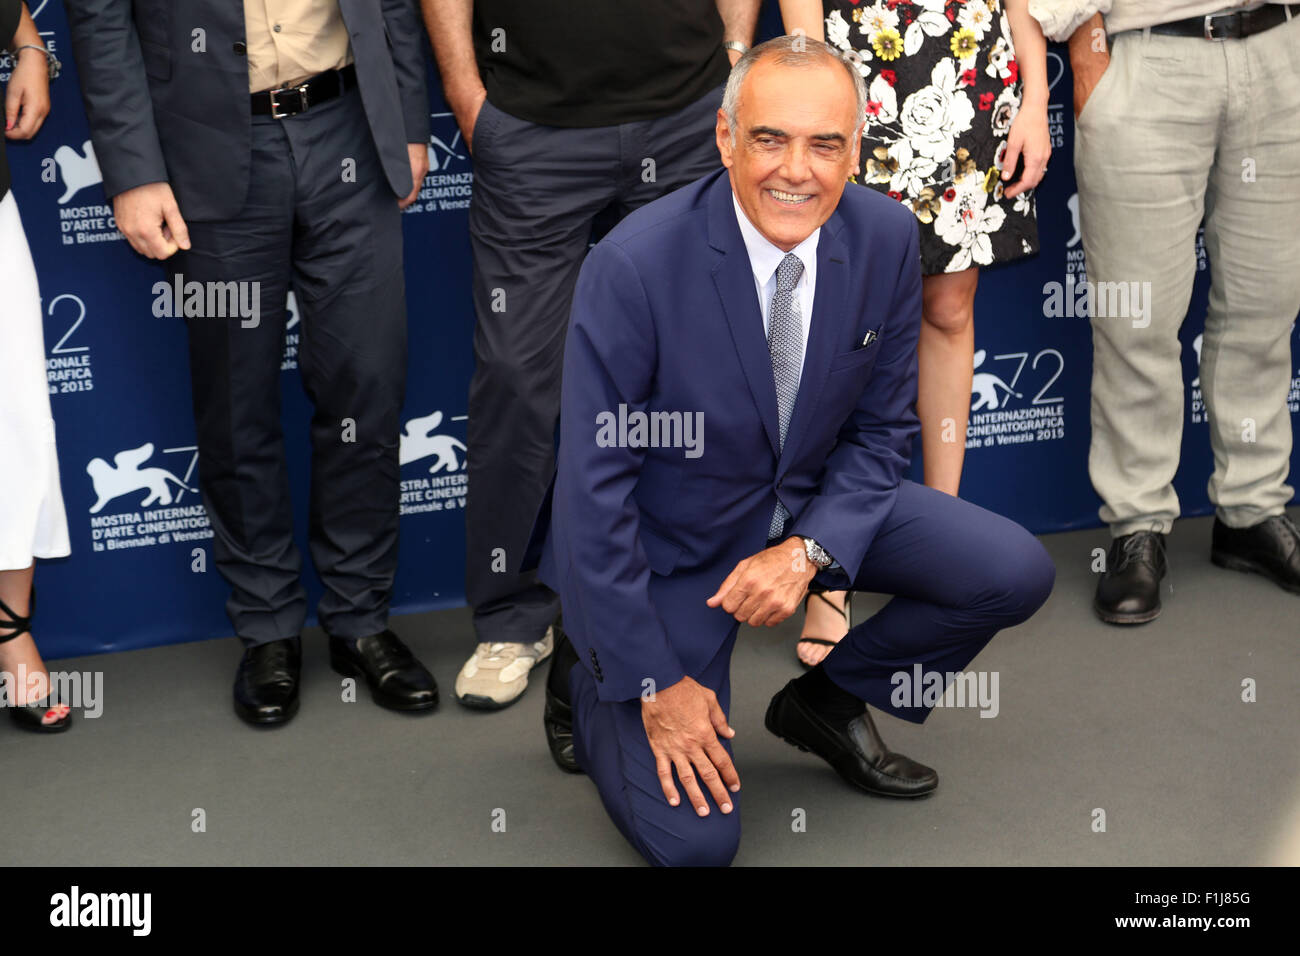 Venice, Italy. 2nd September, 2015. Venezia International Film Festival director Alberto Barbera poses at a photocall for the 'Venezia 72 Jury' during the 72th annual Venice International Film Festival on 02 September, 2015 in Venice Credit:  Andrea Spinelli/Alamy Live News Stock Photo